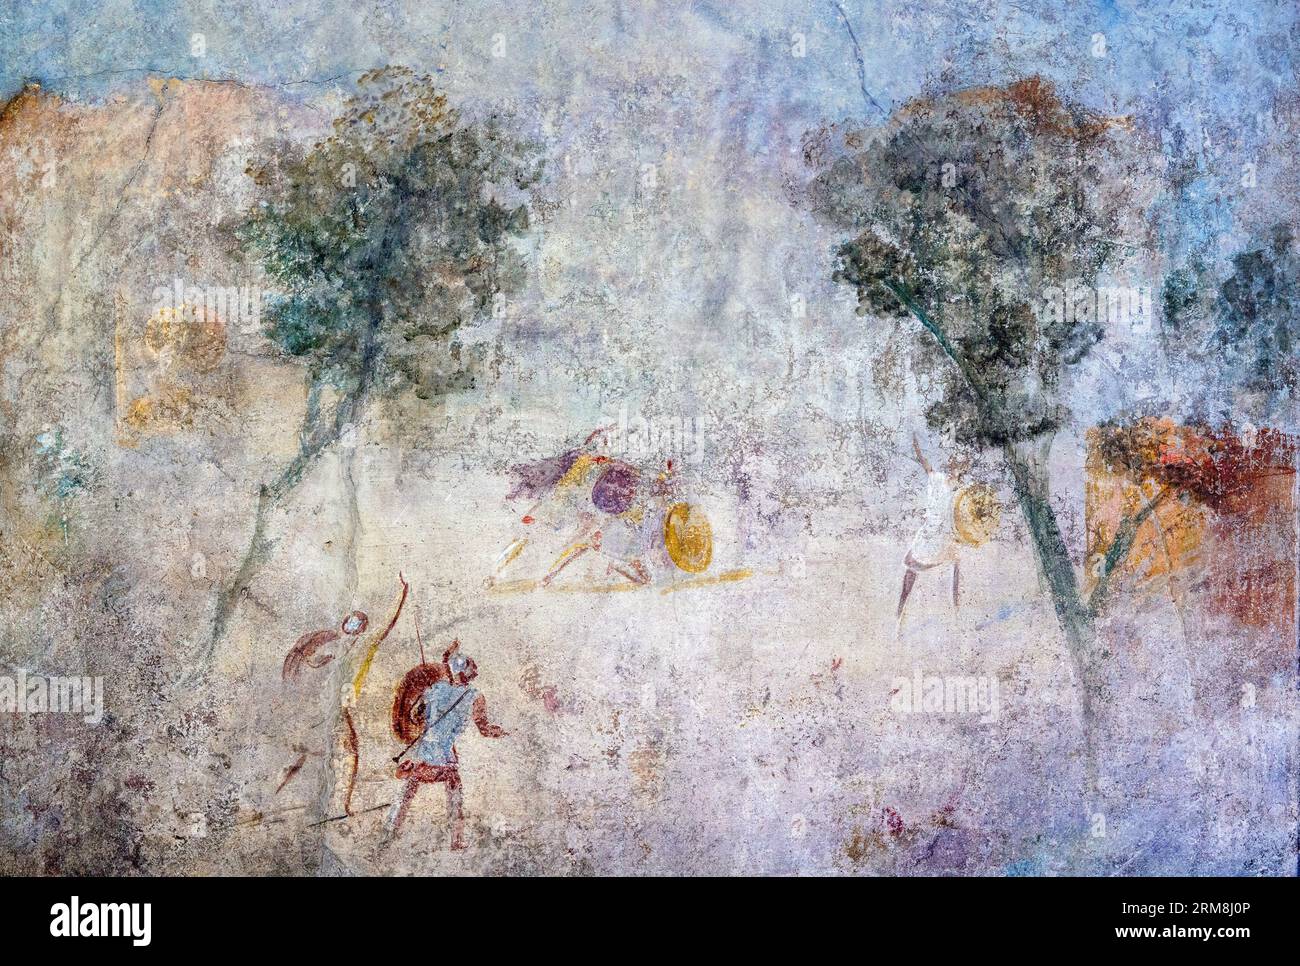 Pompeii Archaeological Site, Campania, Italy.  Fresco of a duel, or battle scene.  Casa del Frutteto.  Orchard House.  Pompeii, Herculaneum, and Torre Stock Photo